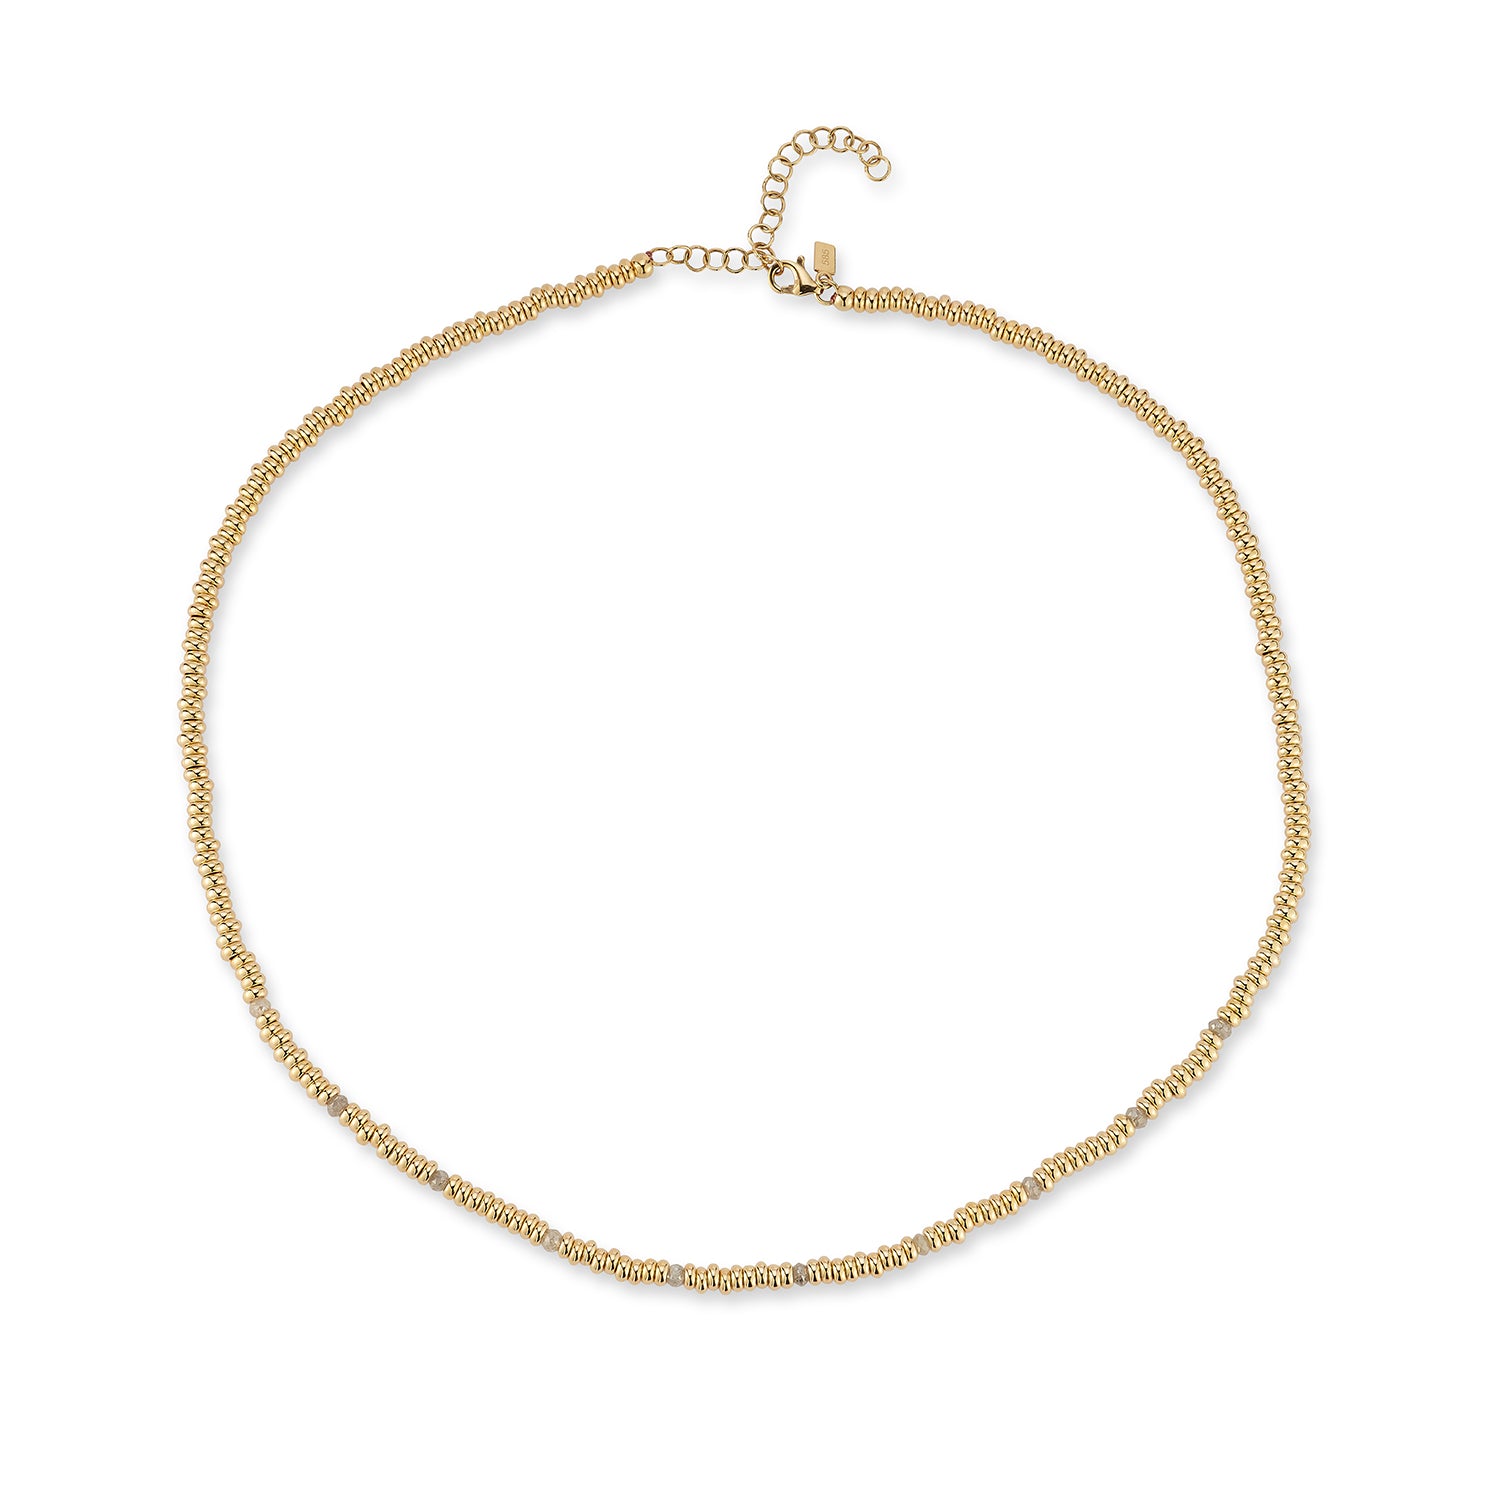 Birthstone Bead Necklace In Diamond in 14k yellow gold